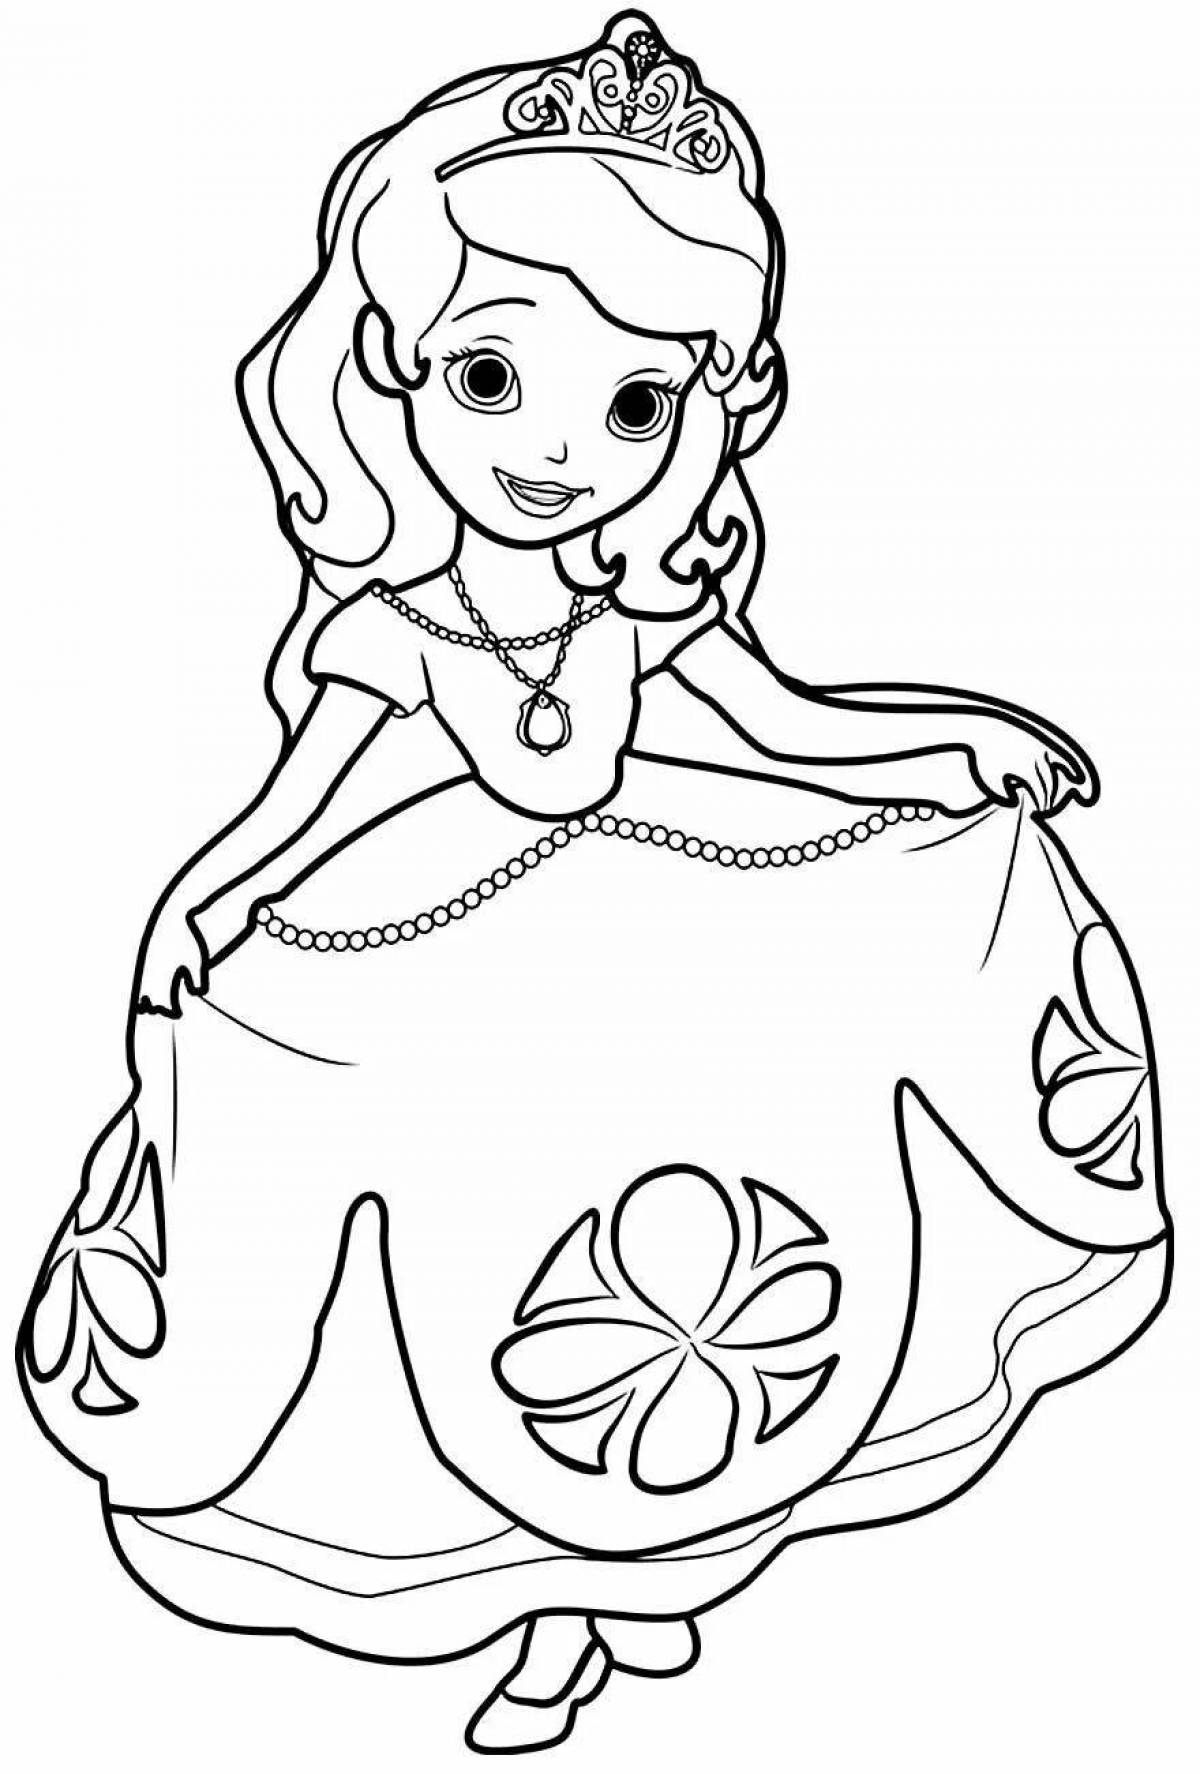 Live coloring for girls princesses 3-4 years old